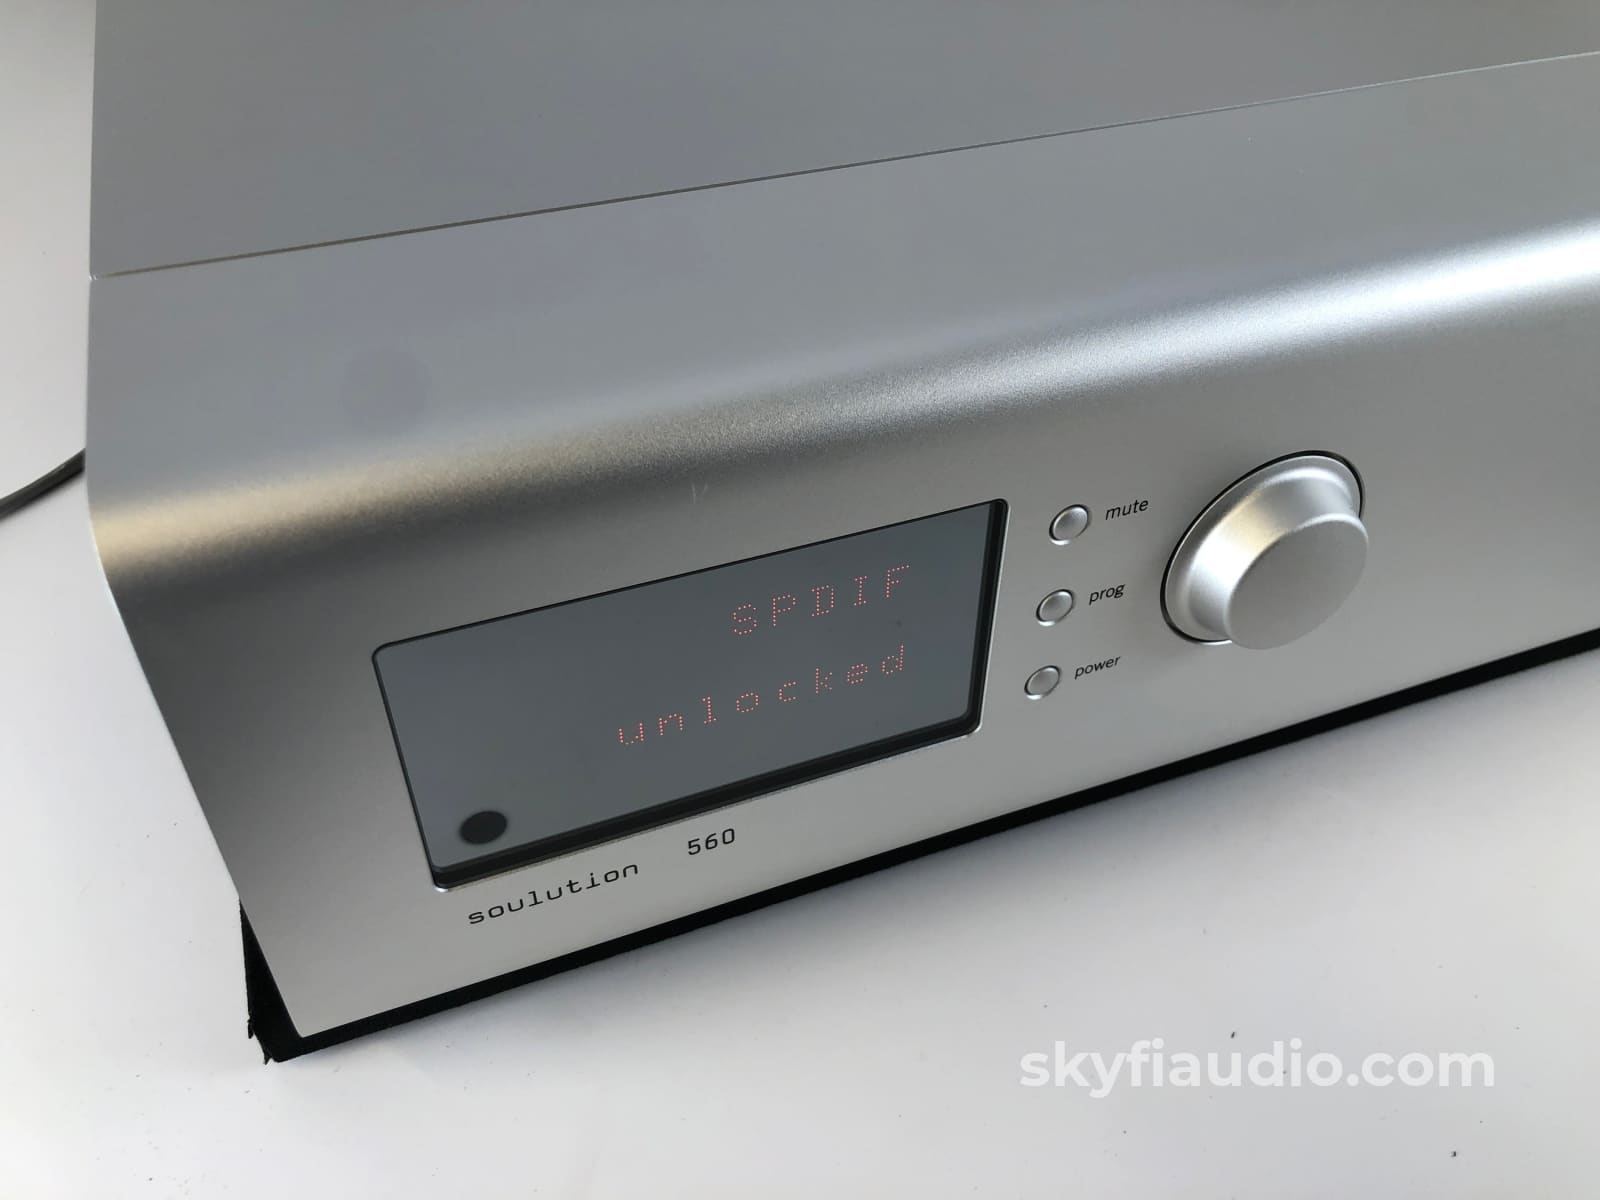 Soulution Audio 560 D/A Converter - Dsd Capable Very Advanced And Great Reviews $35K Msrp Cd +